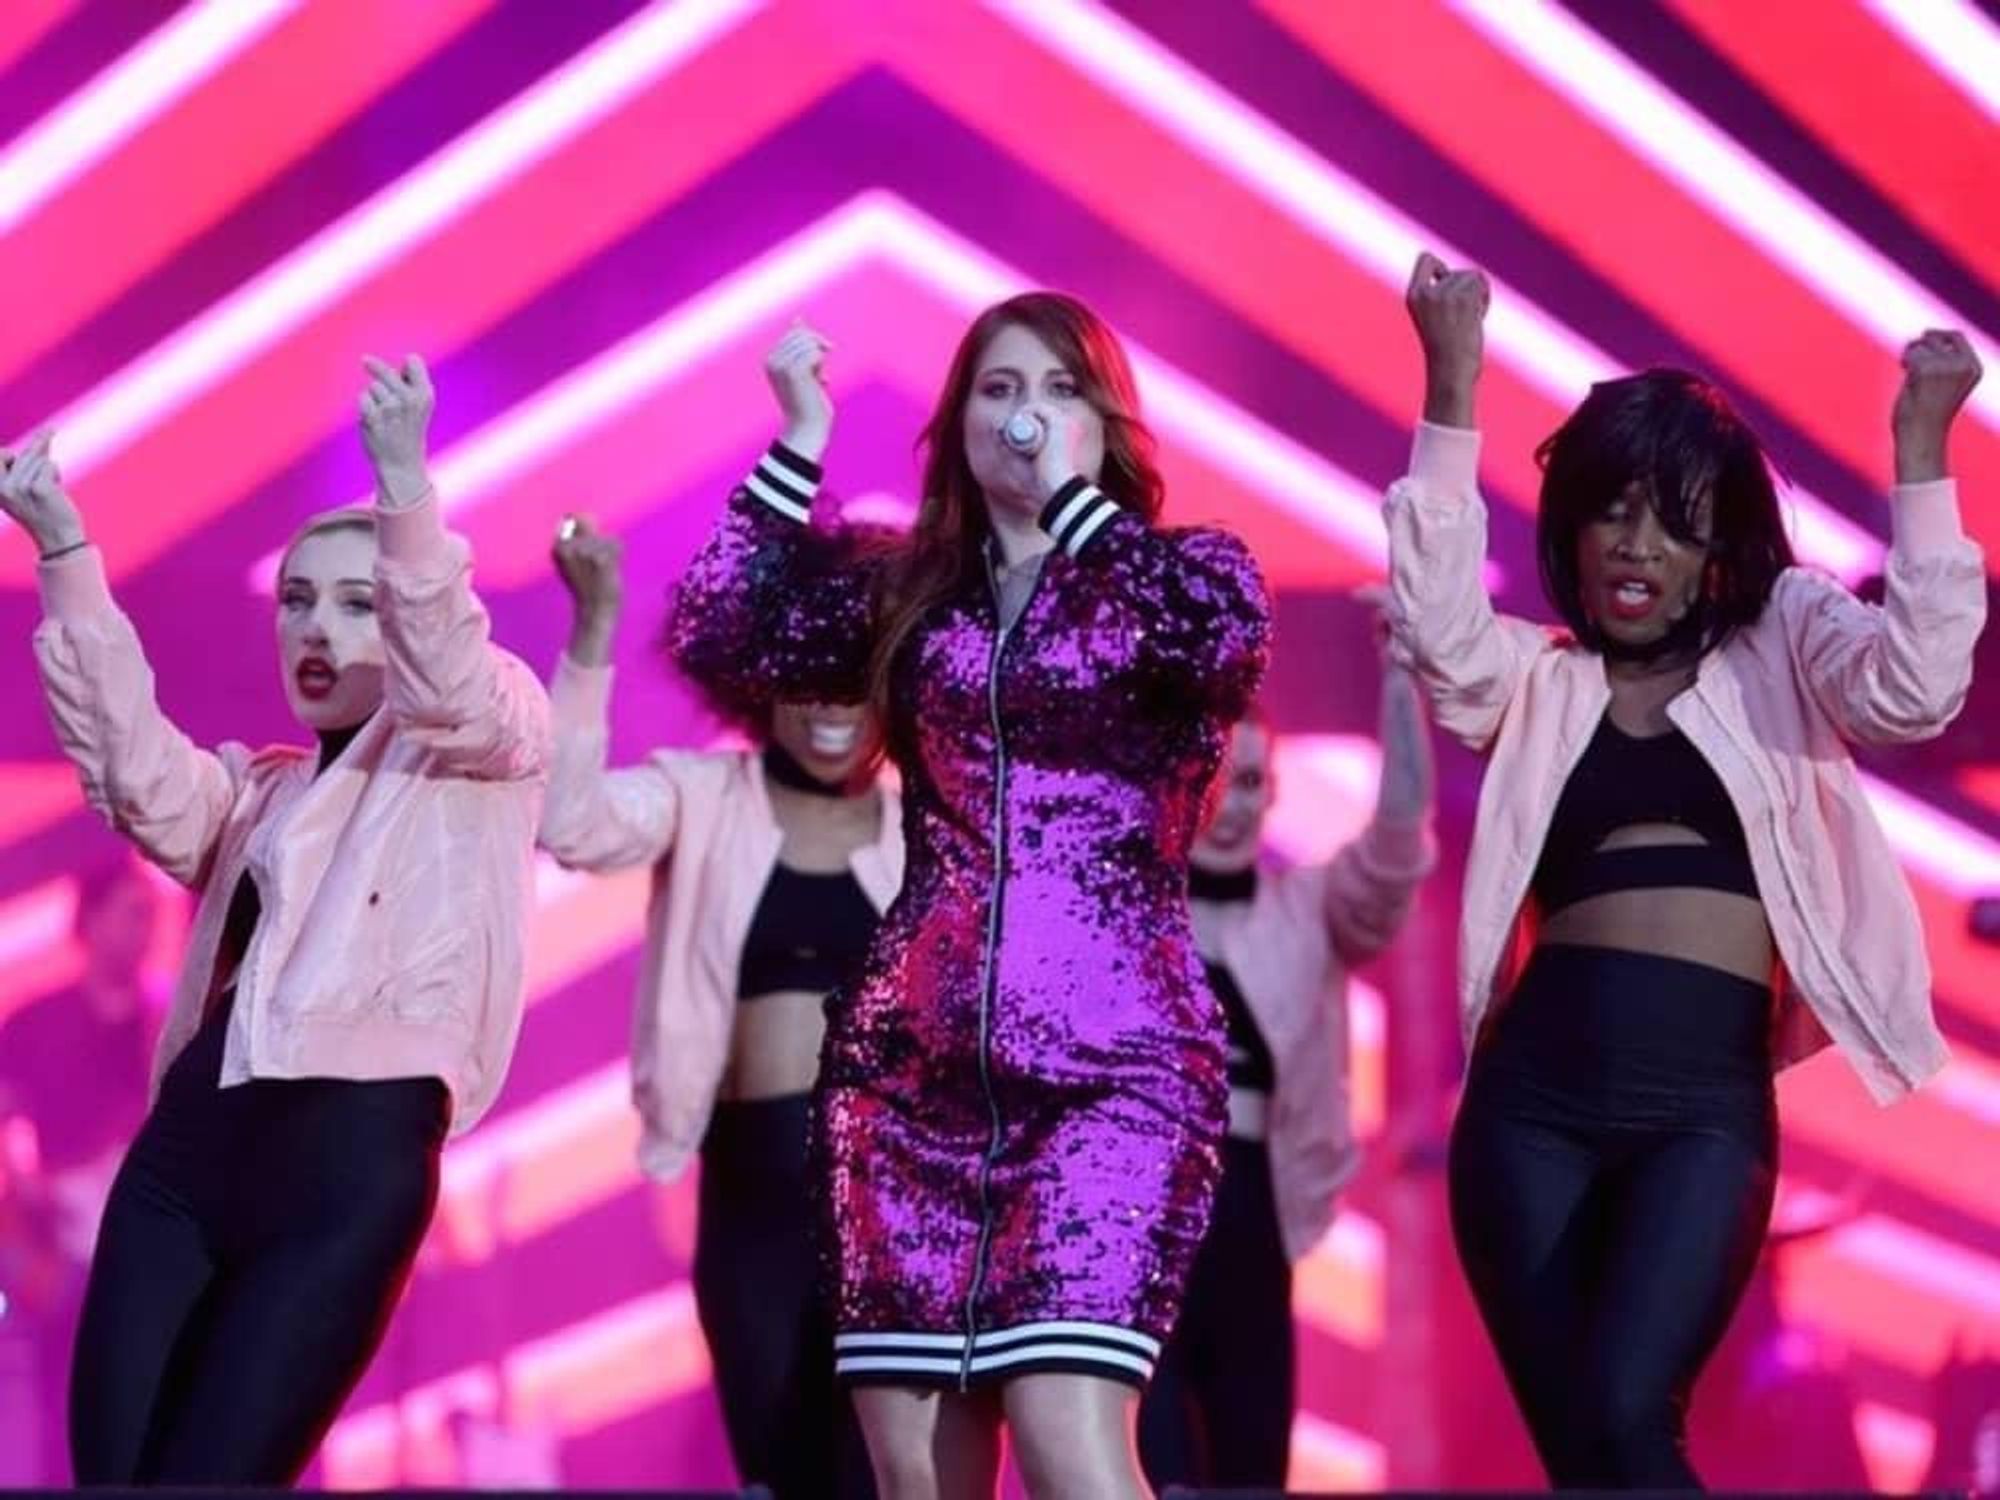 Meghan Trainor Says She Wrote 'Mother' in Response to 'Silly Men